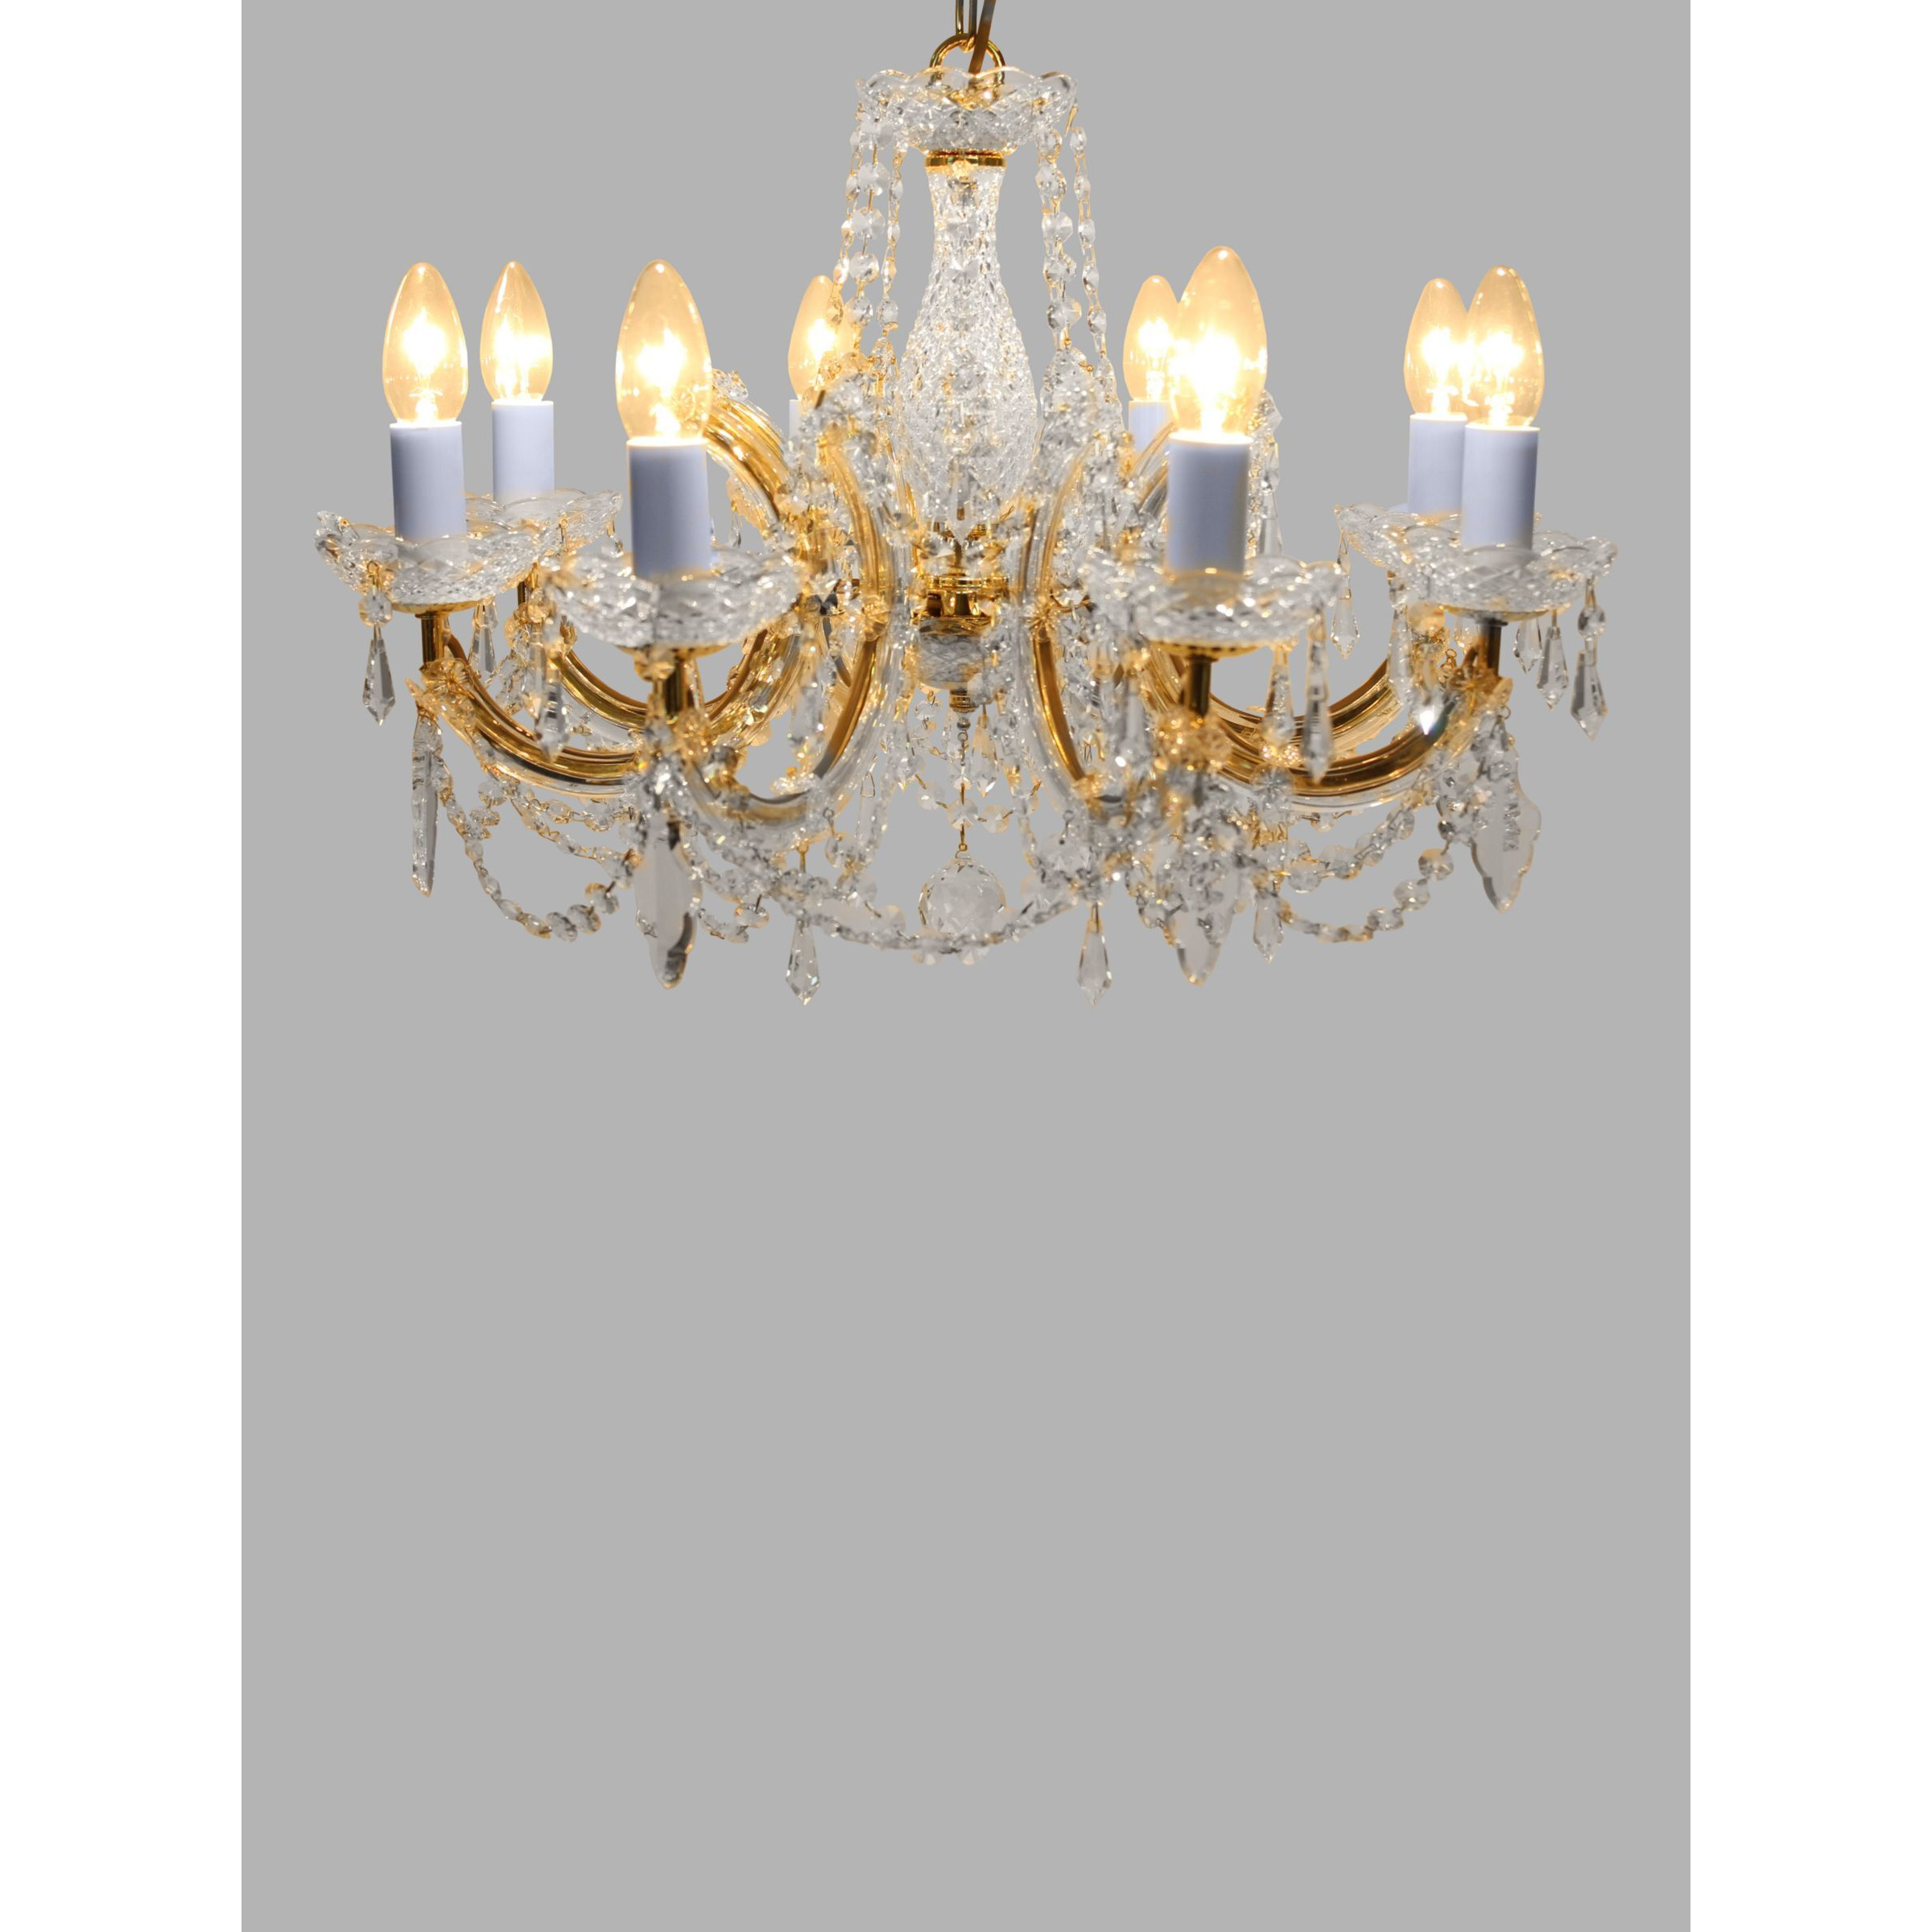 Impex Marie Theresa Crystal Chandelier Ceiling Light, 8 Arms - image 1